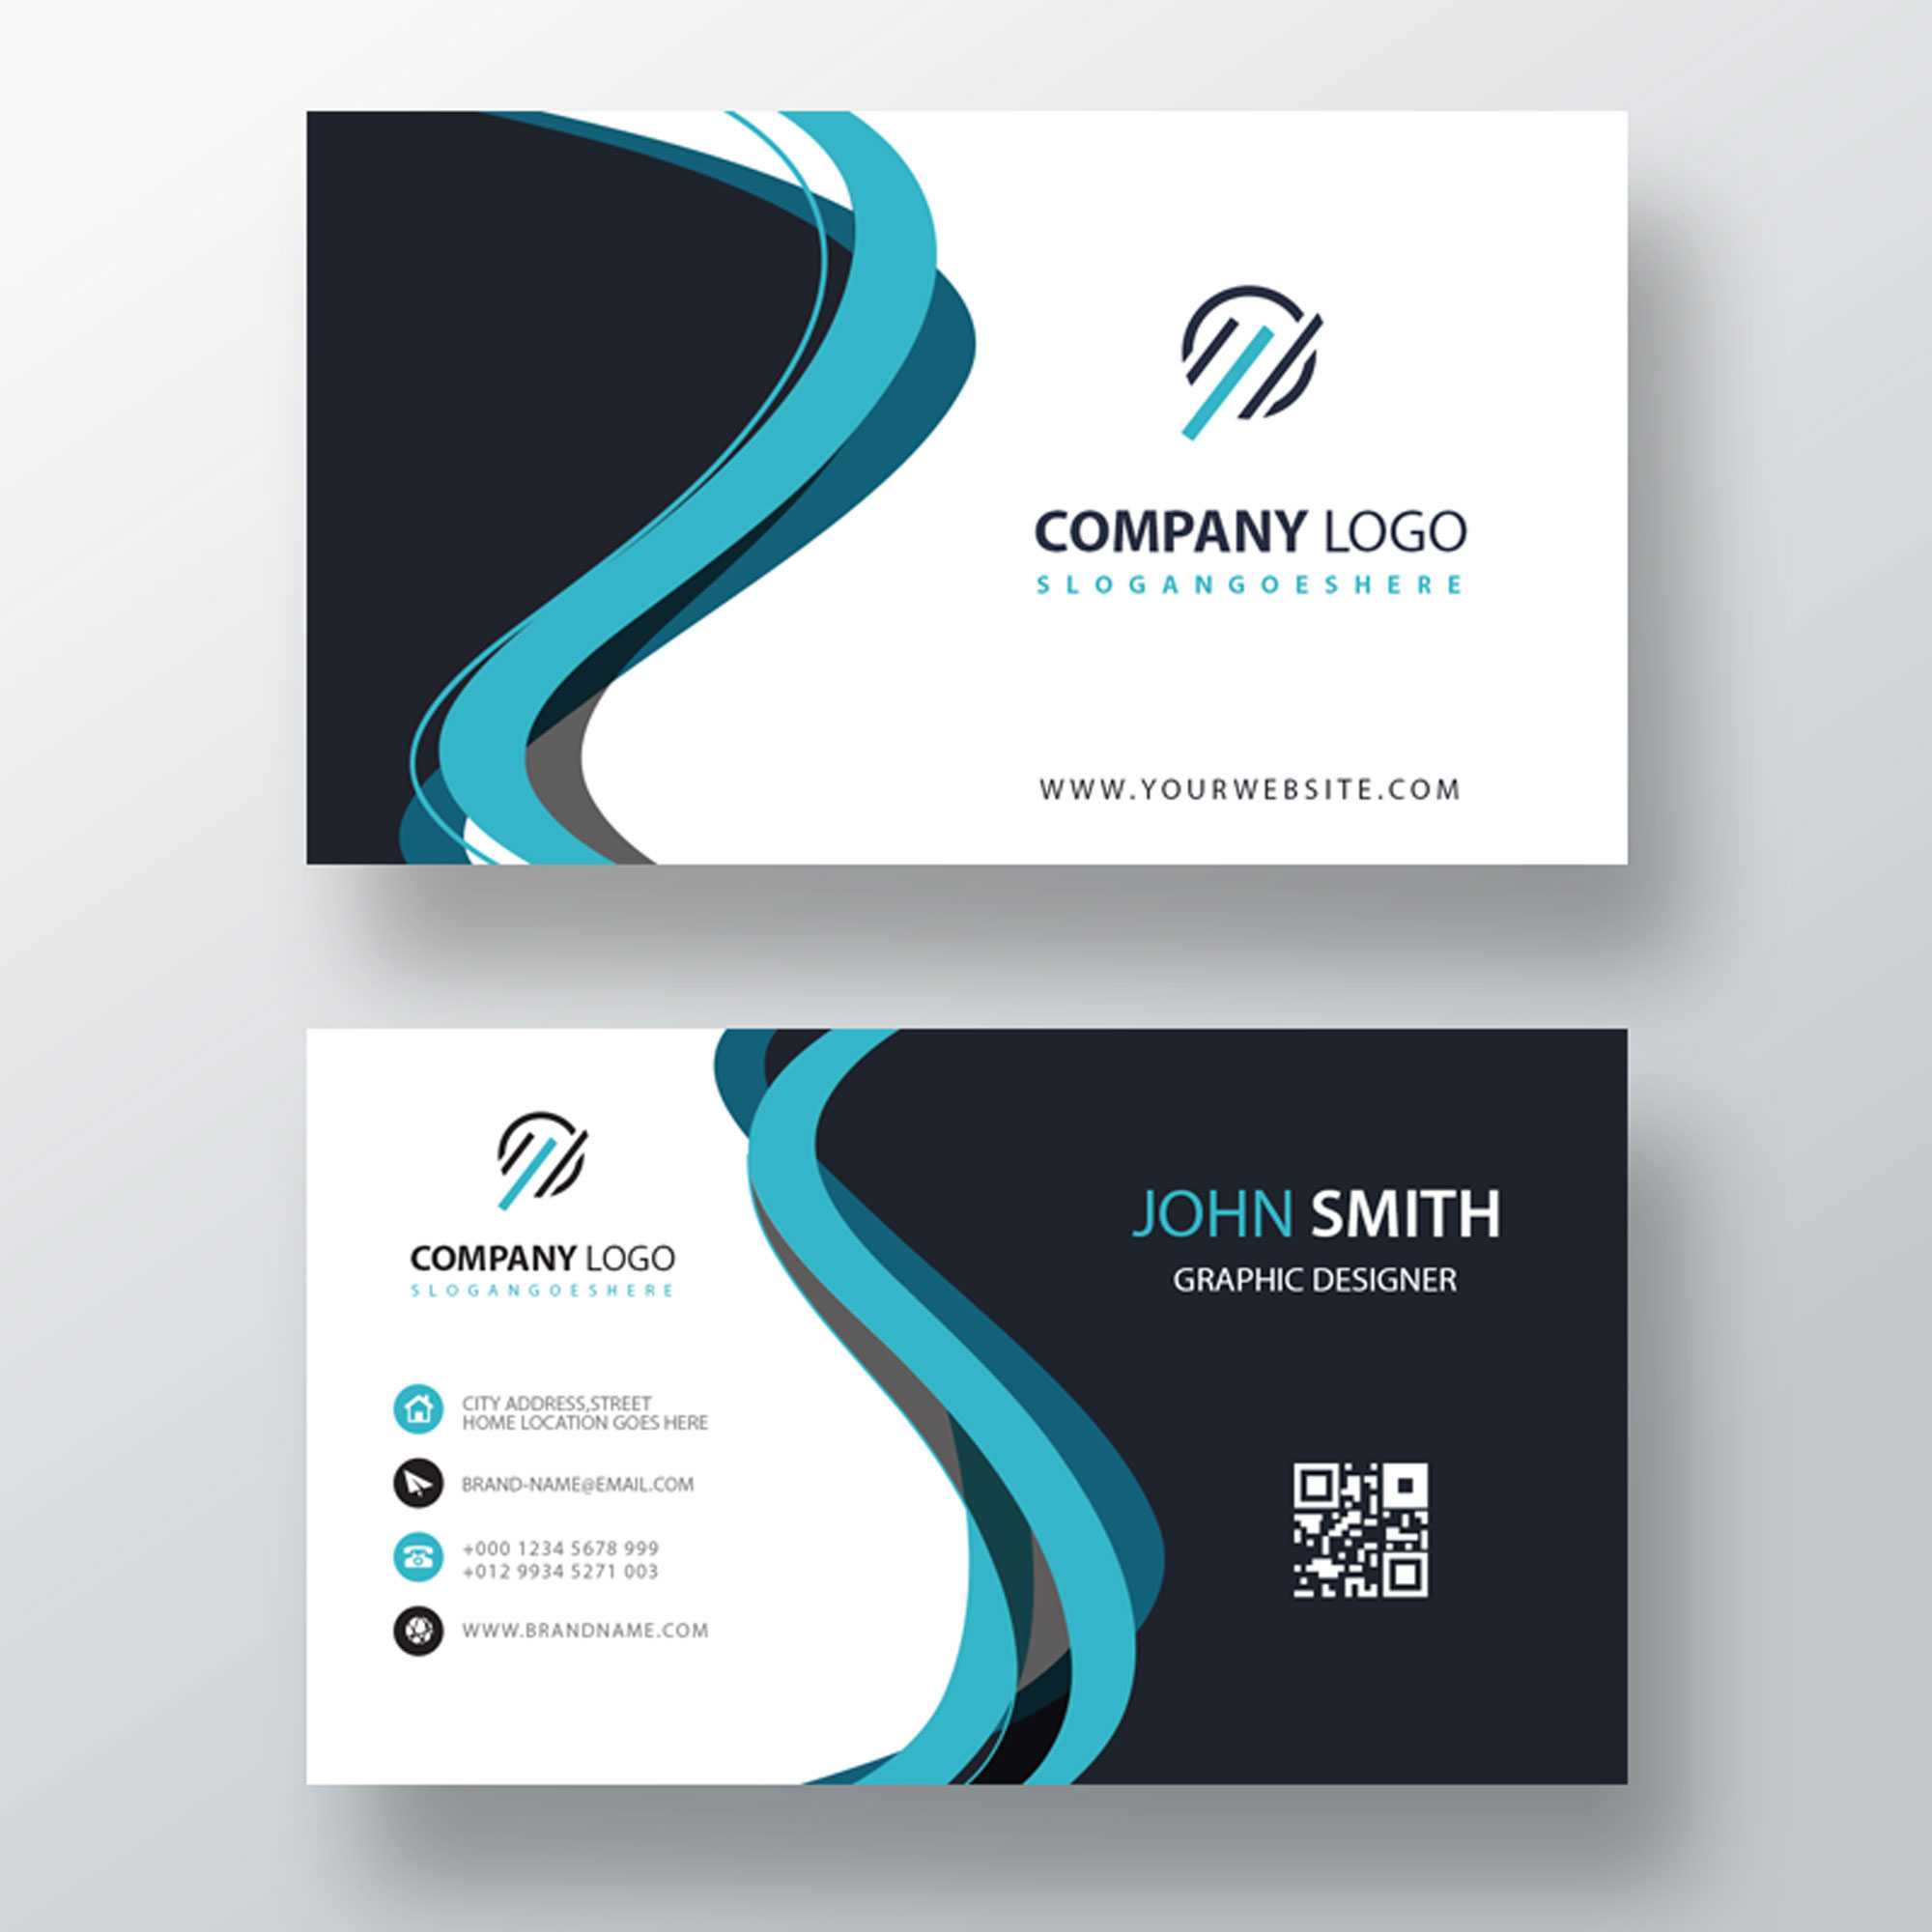 Classic Company Visiting Card Template | Free Customize Pertaining To Company Business Cards Templates